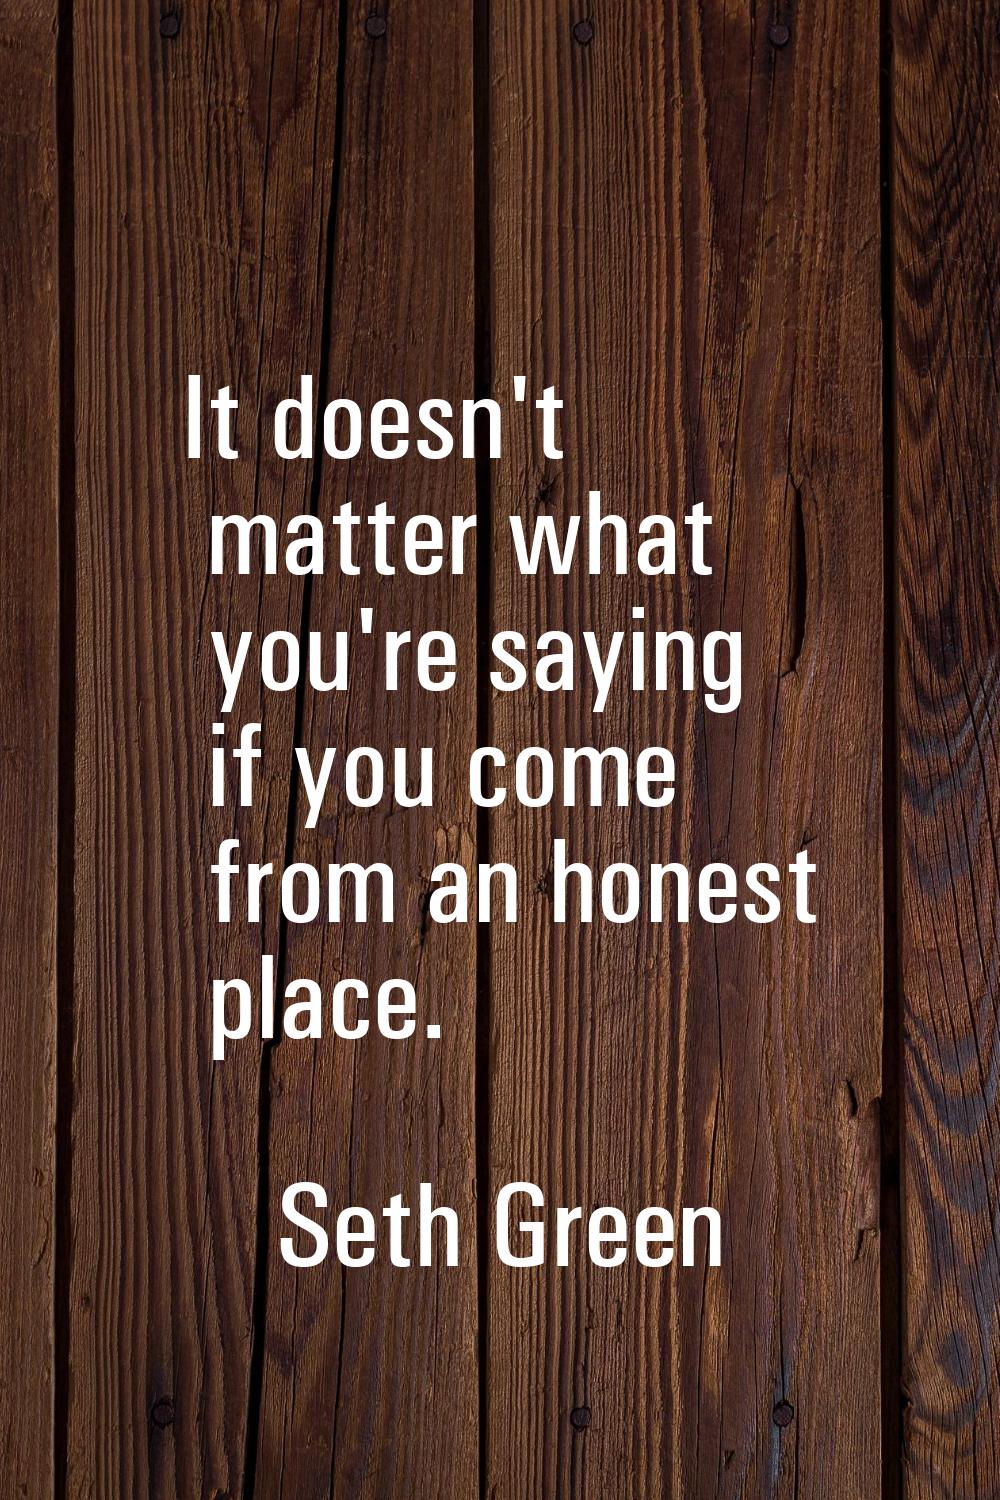 It doesn't matter what you're saying if you come from an honest place.